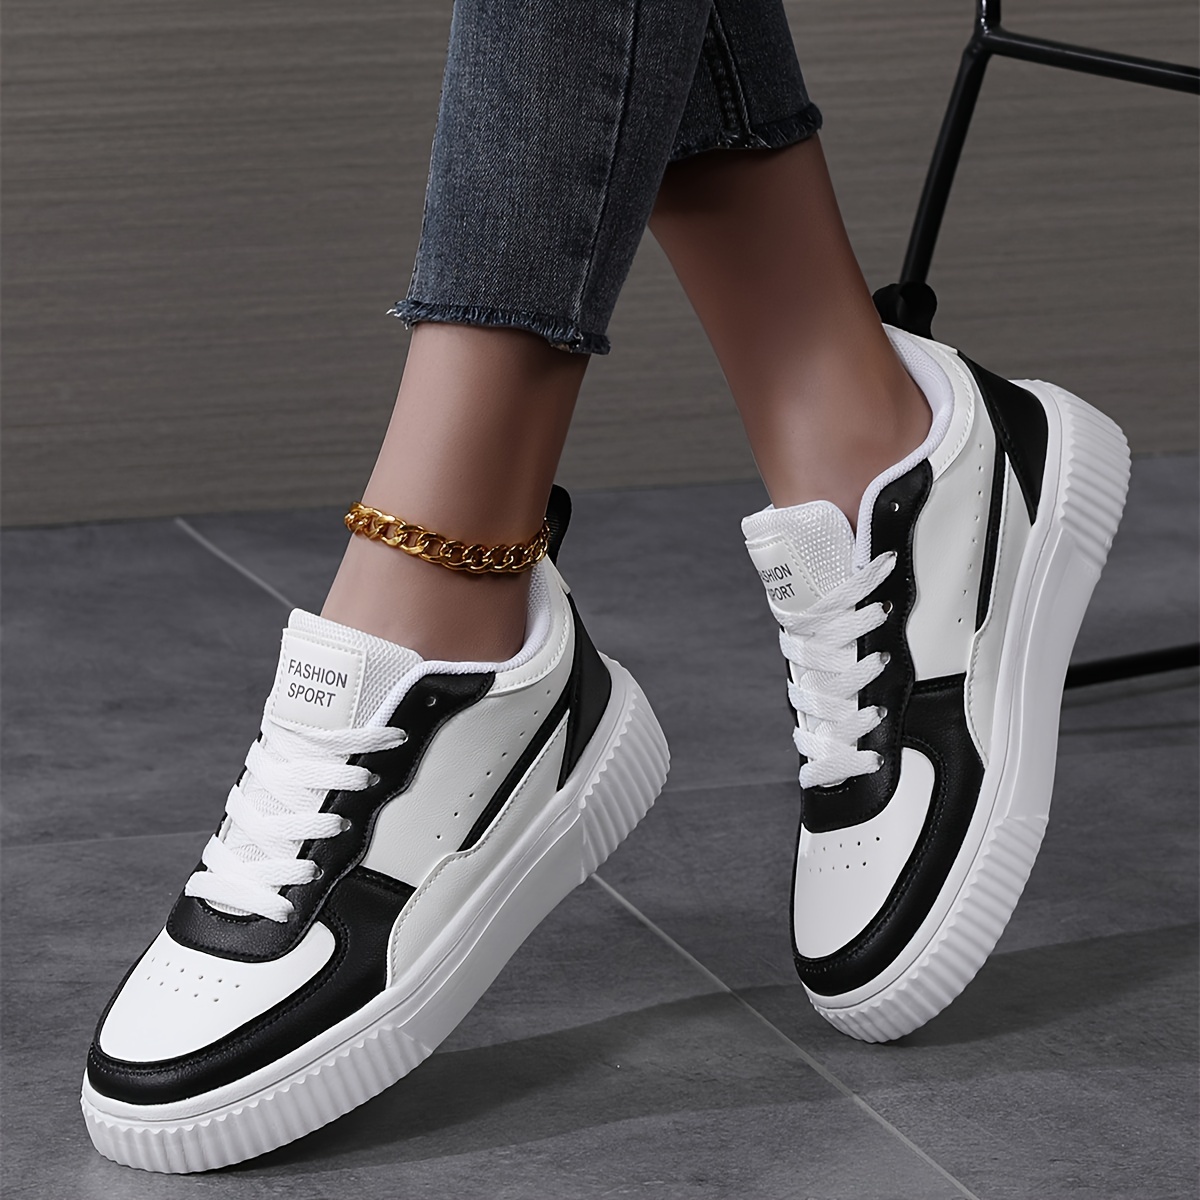 womens colorblock casual sneakers lace up comfy platform pastry skate shoes lightweight low top daily shoes details 3